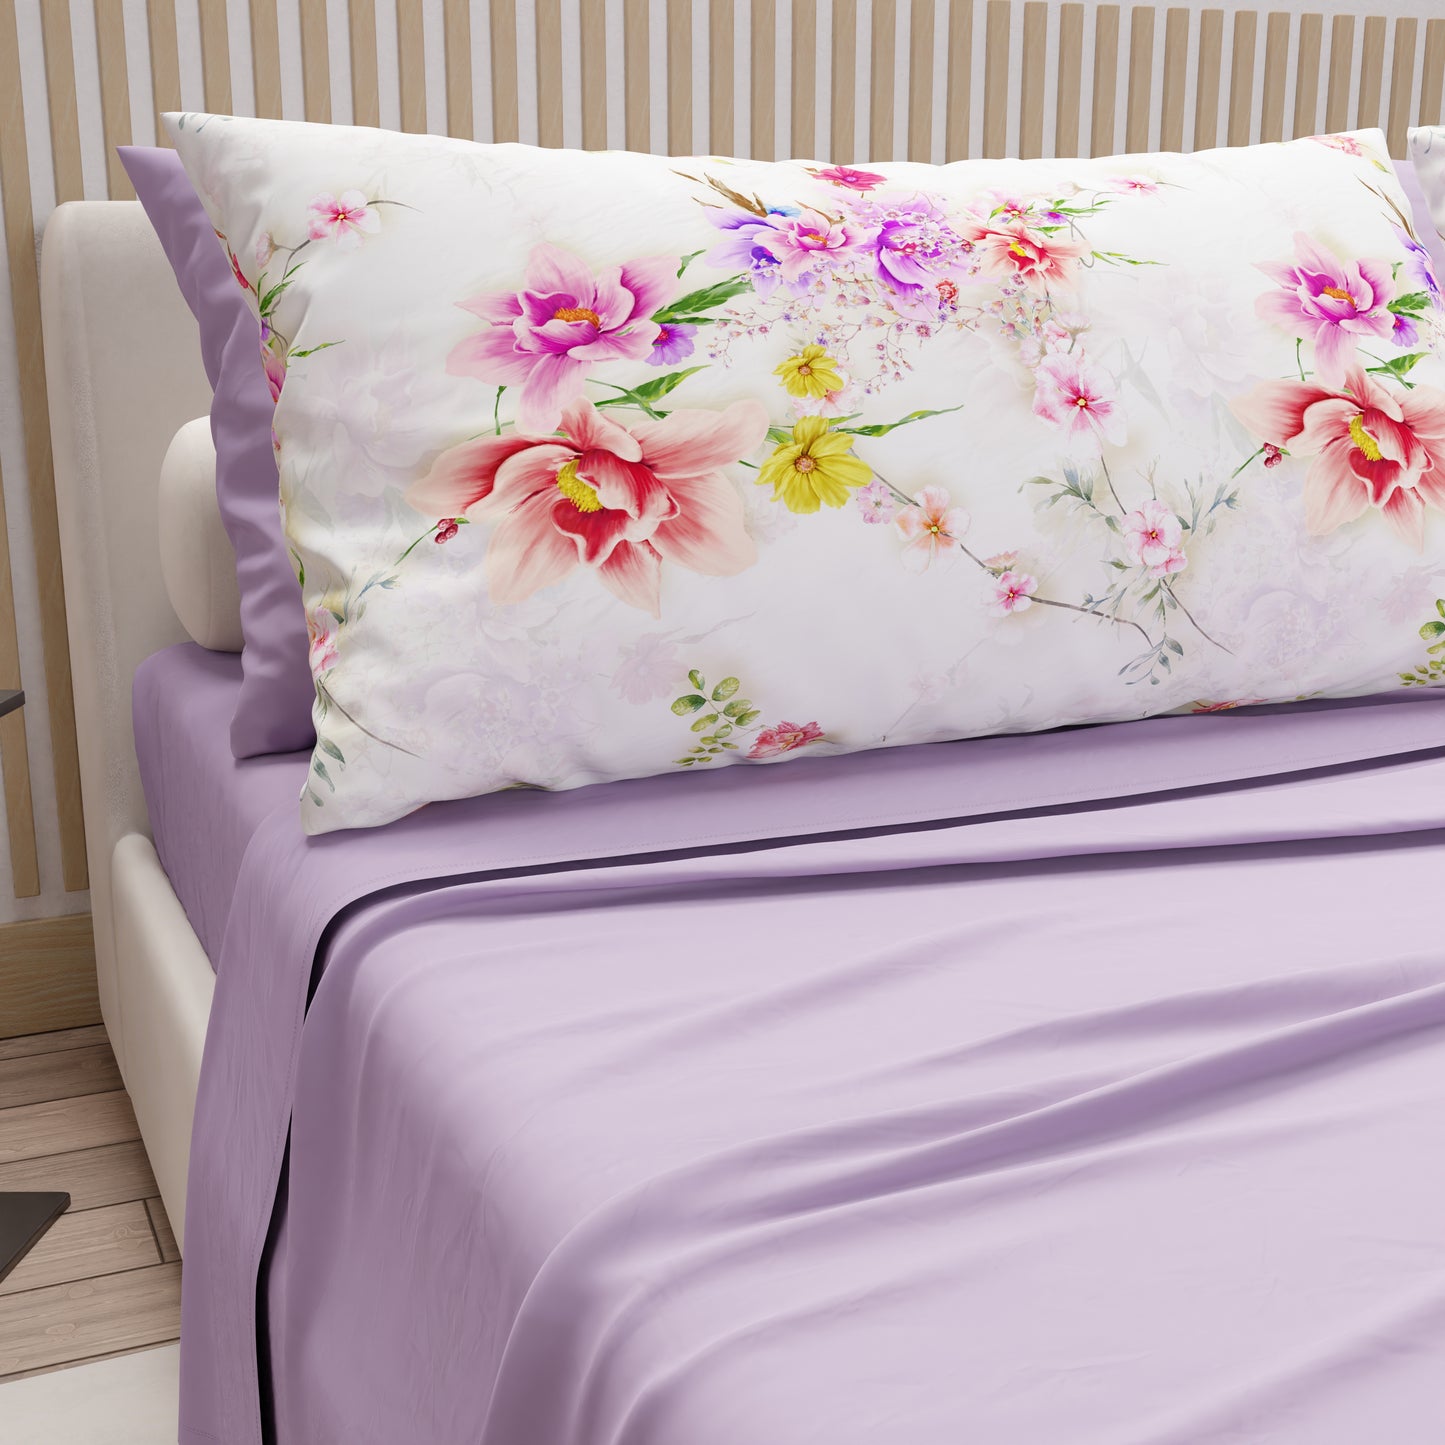 Cotton Sheets, Bed Set with Spring White Digital Print Pillowcases